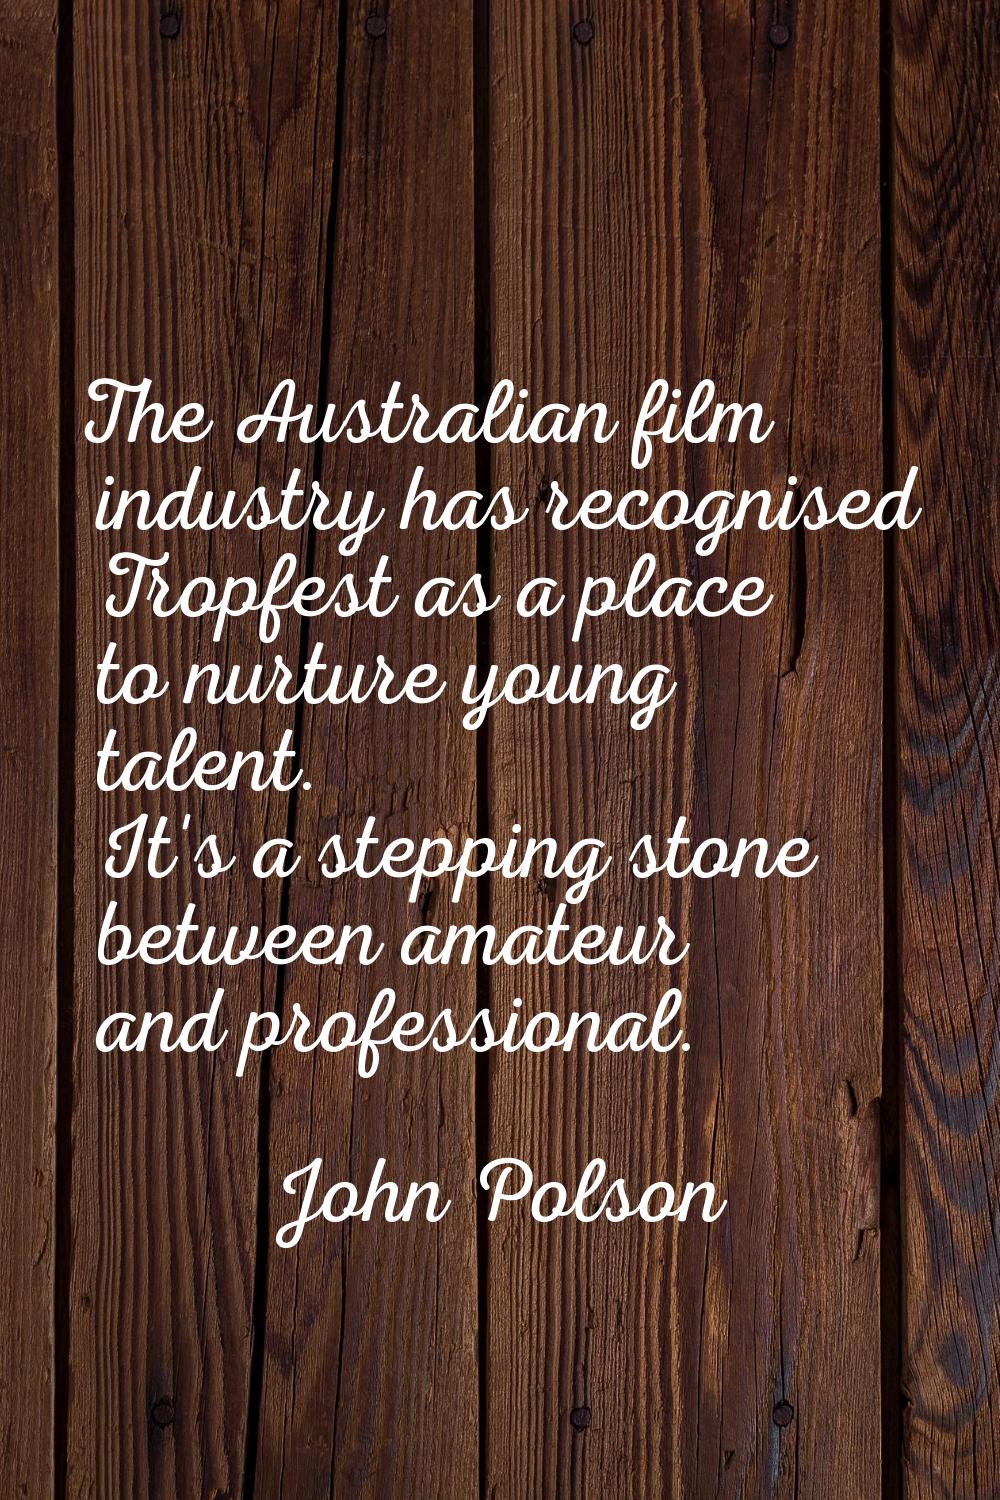 The Australian film industry has recognised Tropfest as a place to nurture young talent. It's a ste